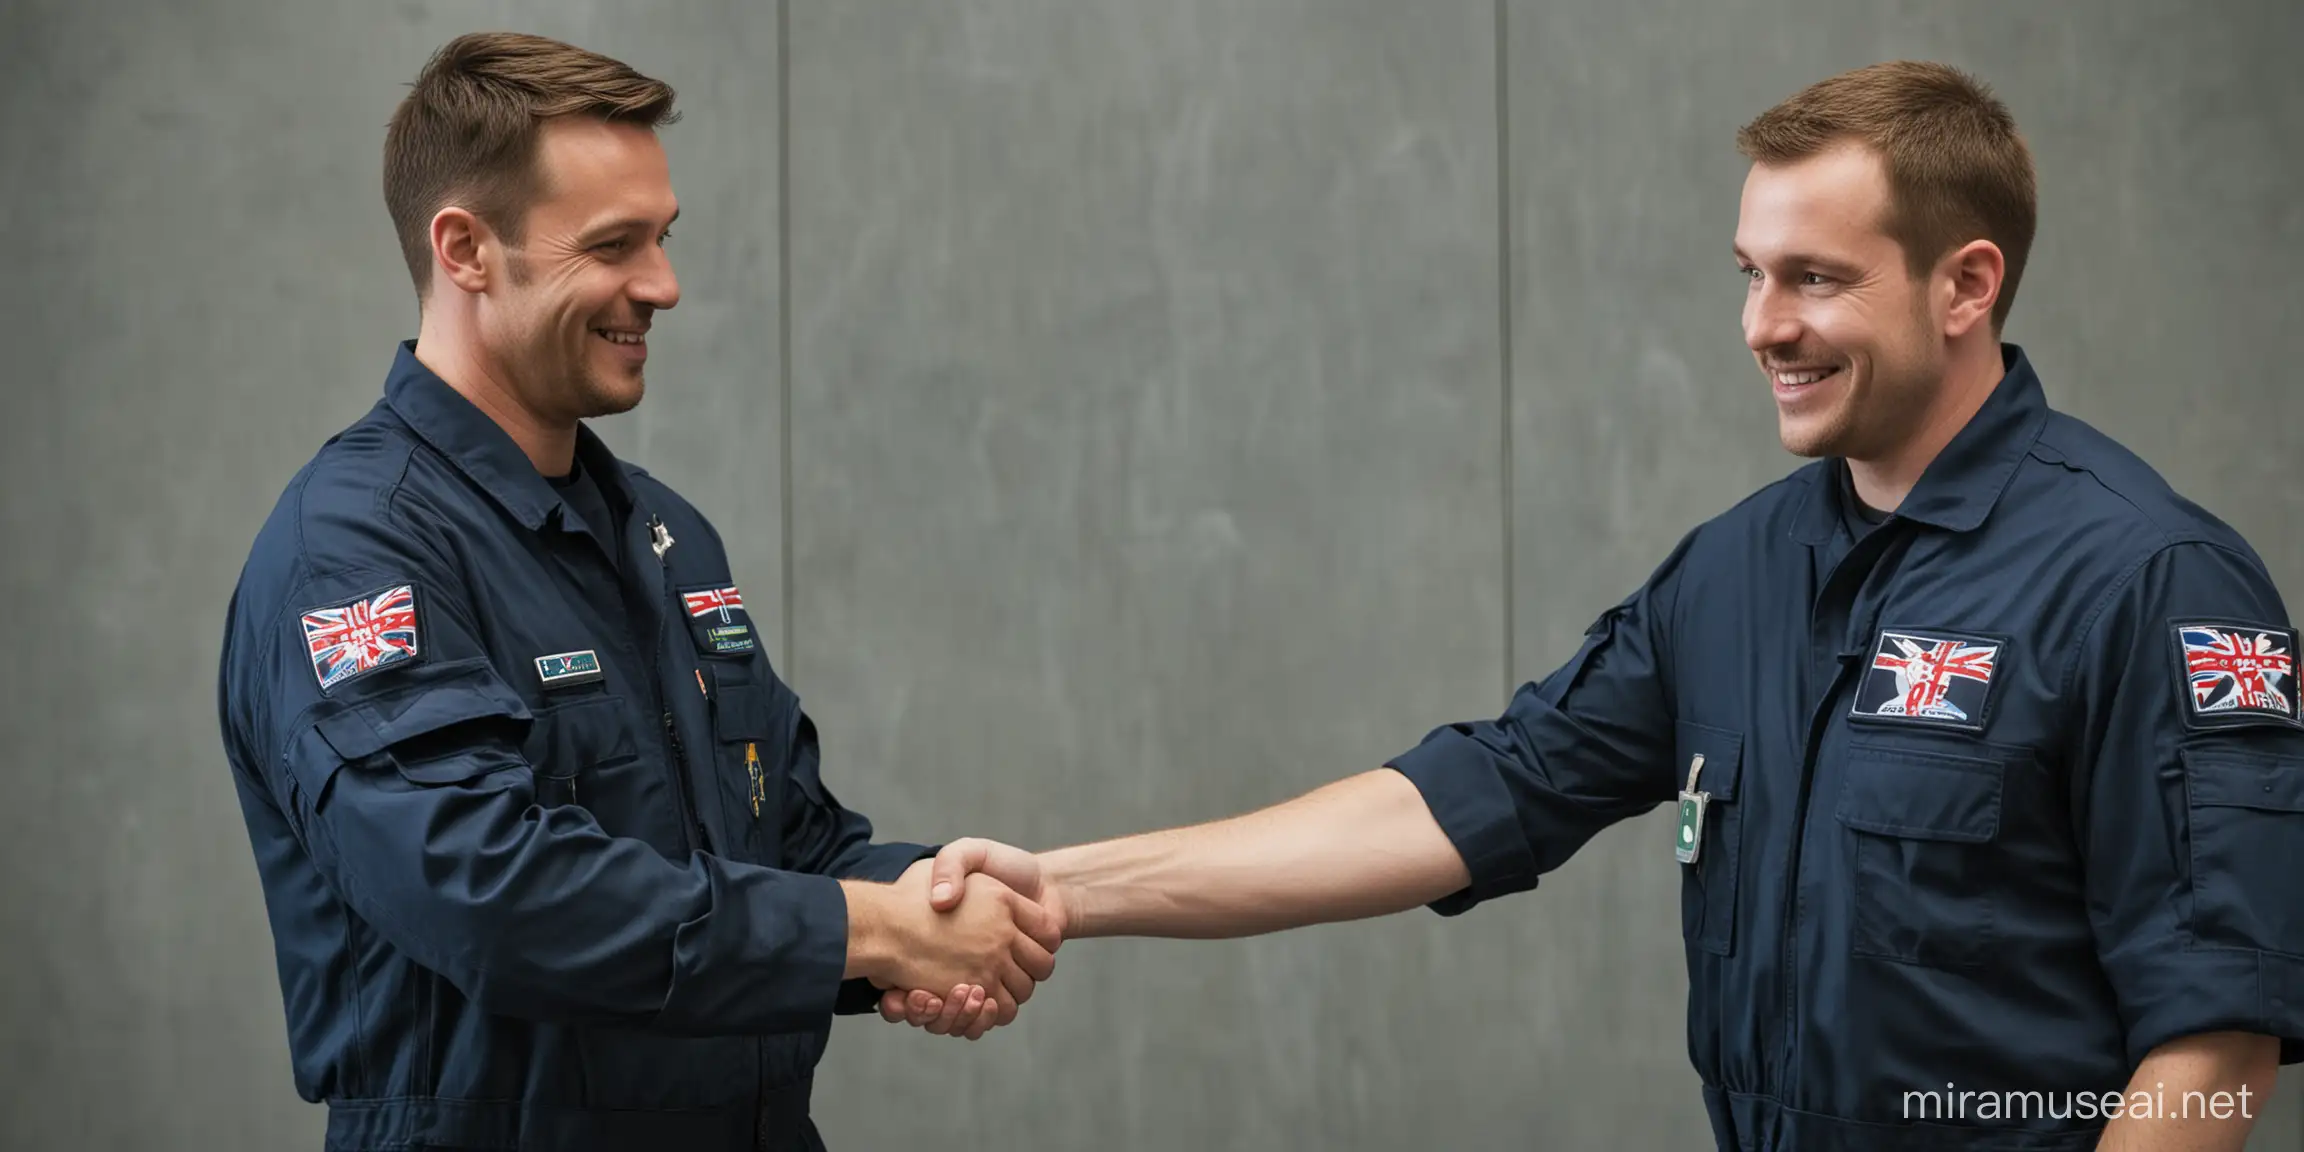 Paramedics in Dark Blue Flight Suits Shaking Hands in Professional Encounter